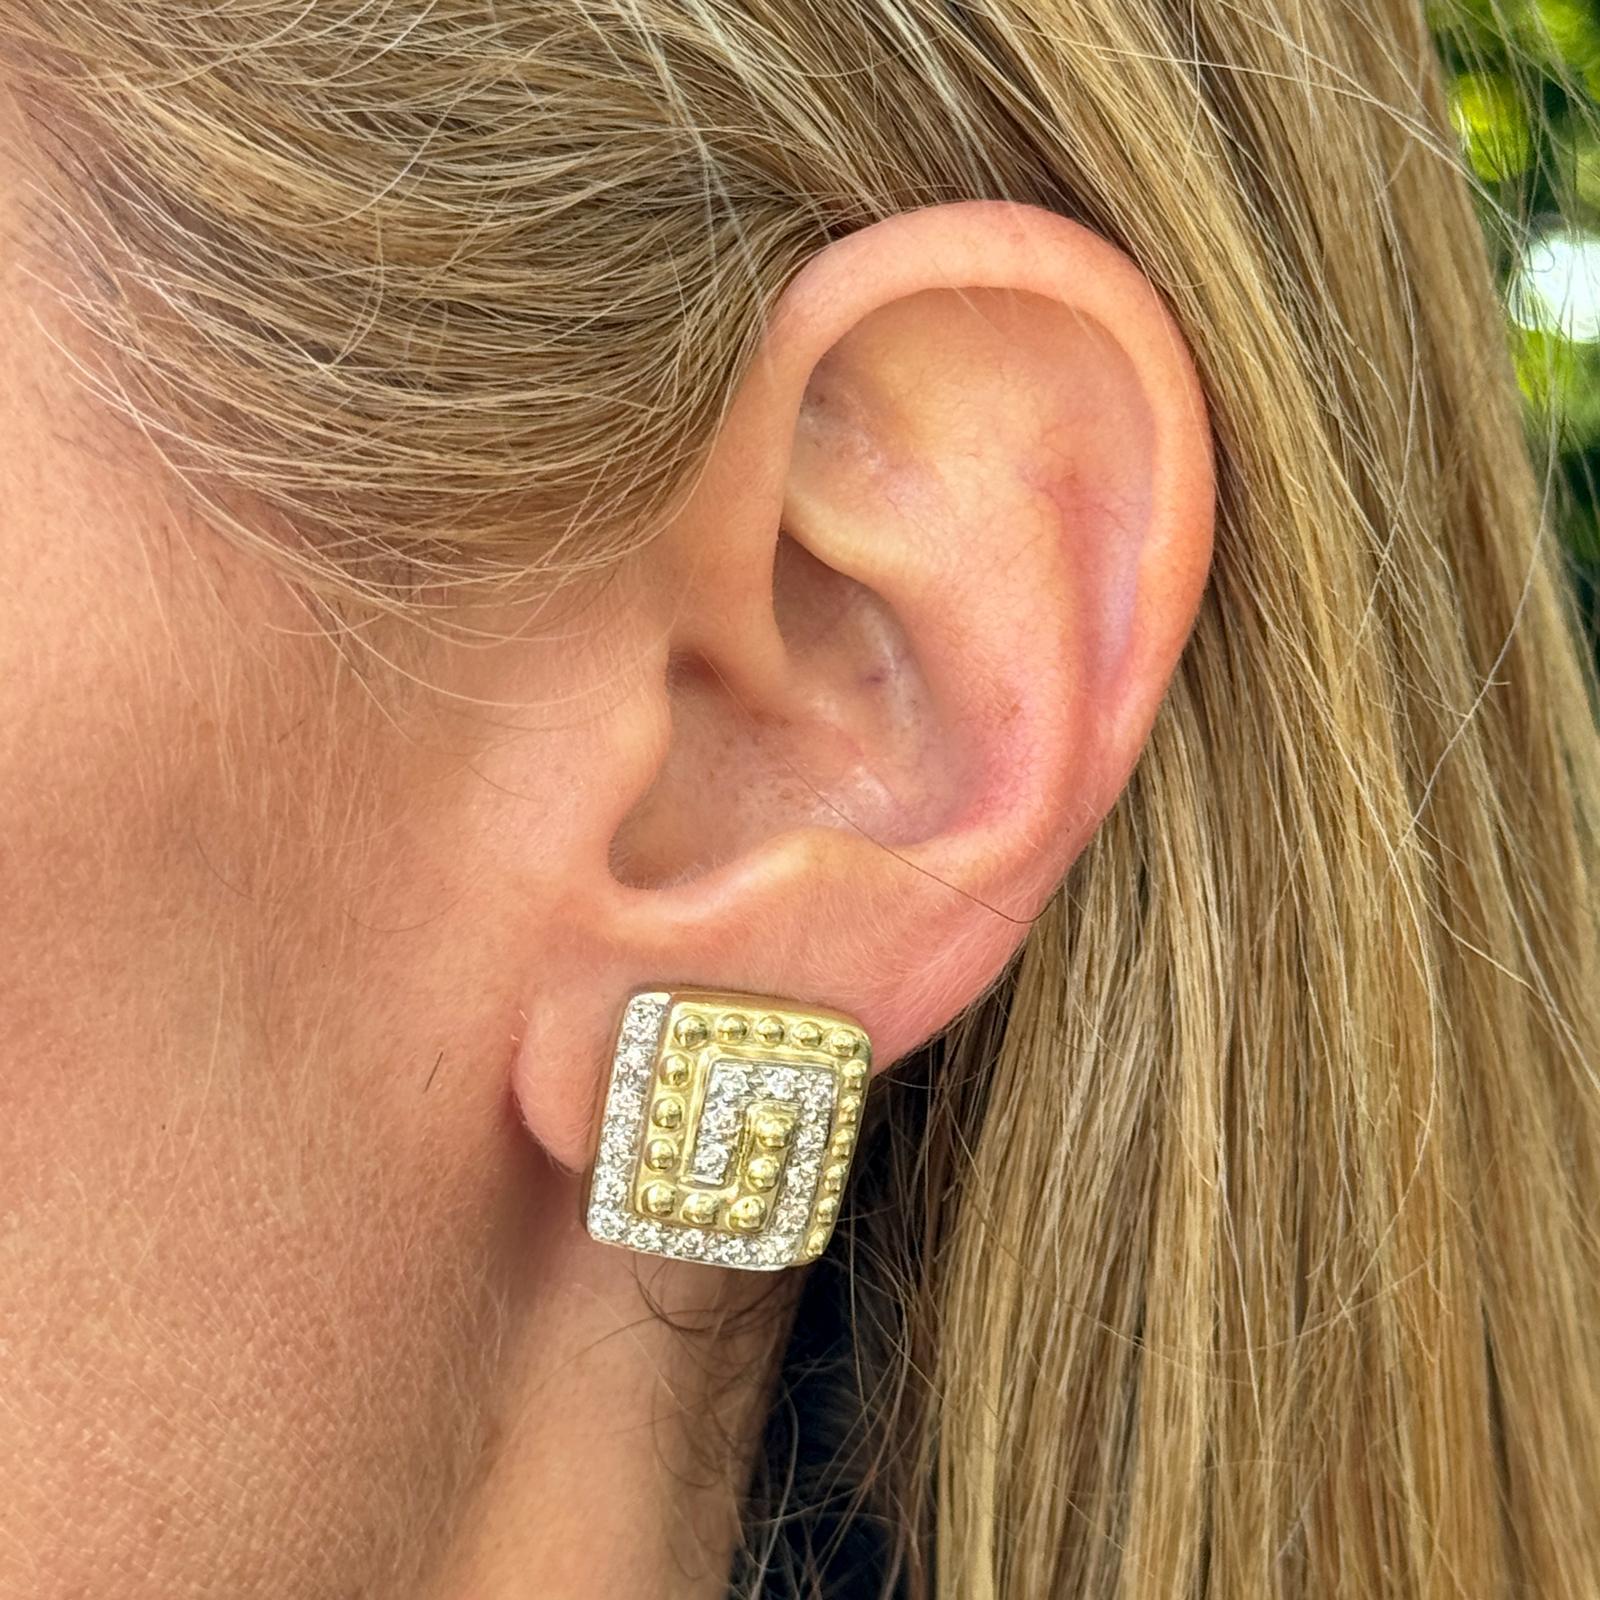 Diamond swirl design earrings crafted in 14 karat yellow gold. The earrings feature 32 round brilliant cut diamonds weighing approximately .75 carat total weight and graded H-I color and VS2-SI1 clarity. The square shape earclip earrings measure 16